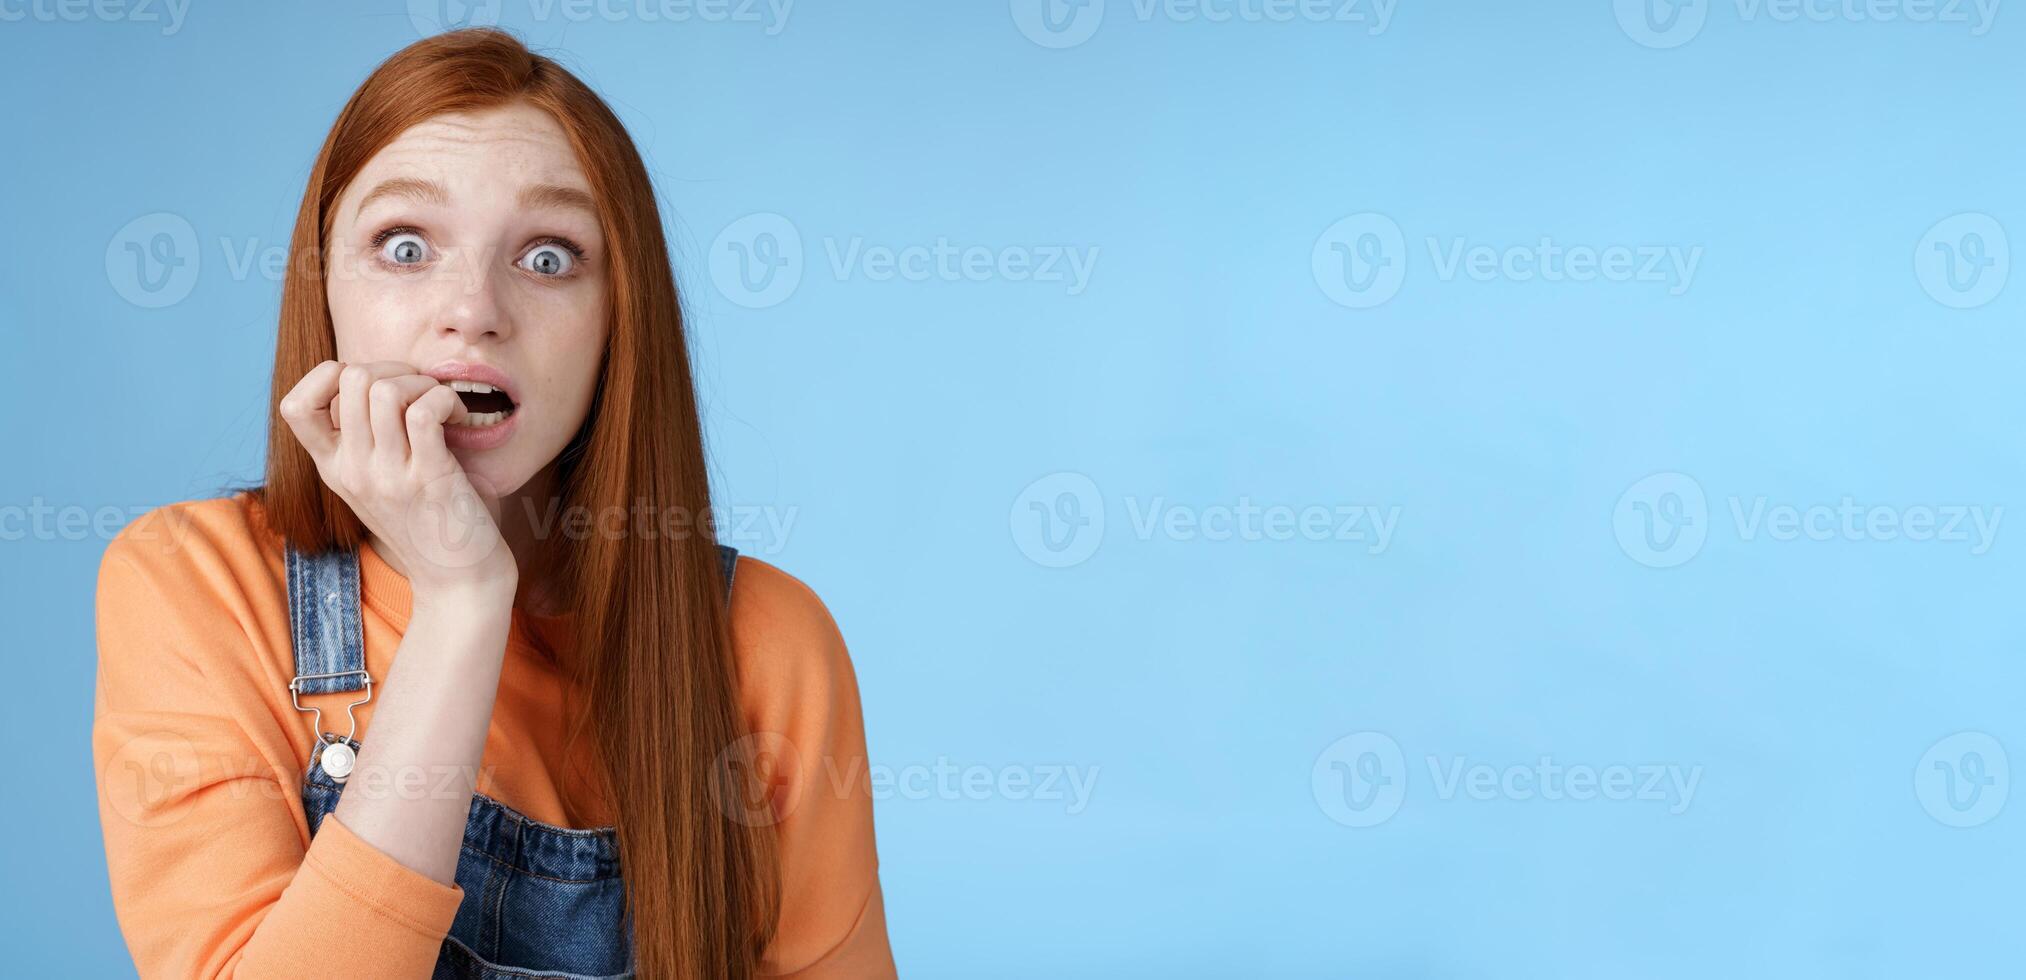 Scared unconfident anxious young trembling redhead girl wide eyes staring intense emotional biting fingernails, fan worry favorite character tv series dies standing nervously blue background photo